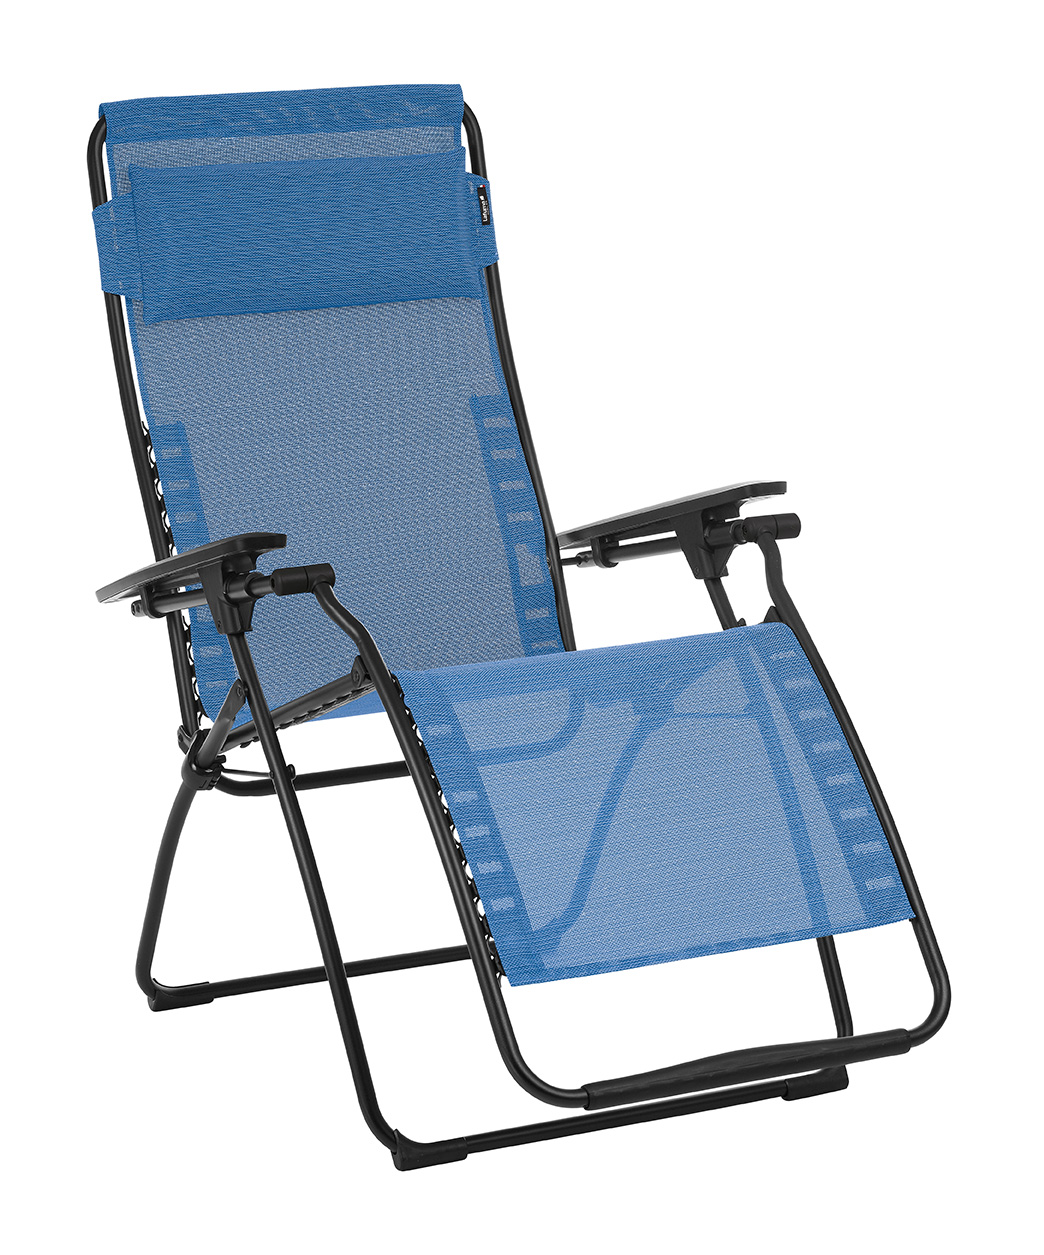 Zero Gravity Recliner - Black Steel Frame - Outremer Duo Fabric